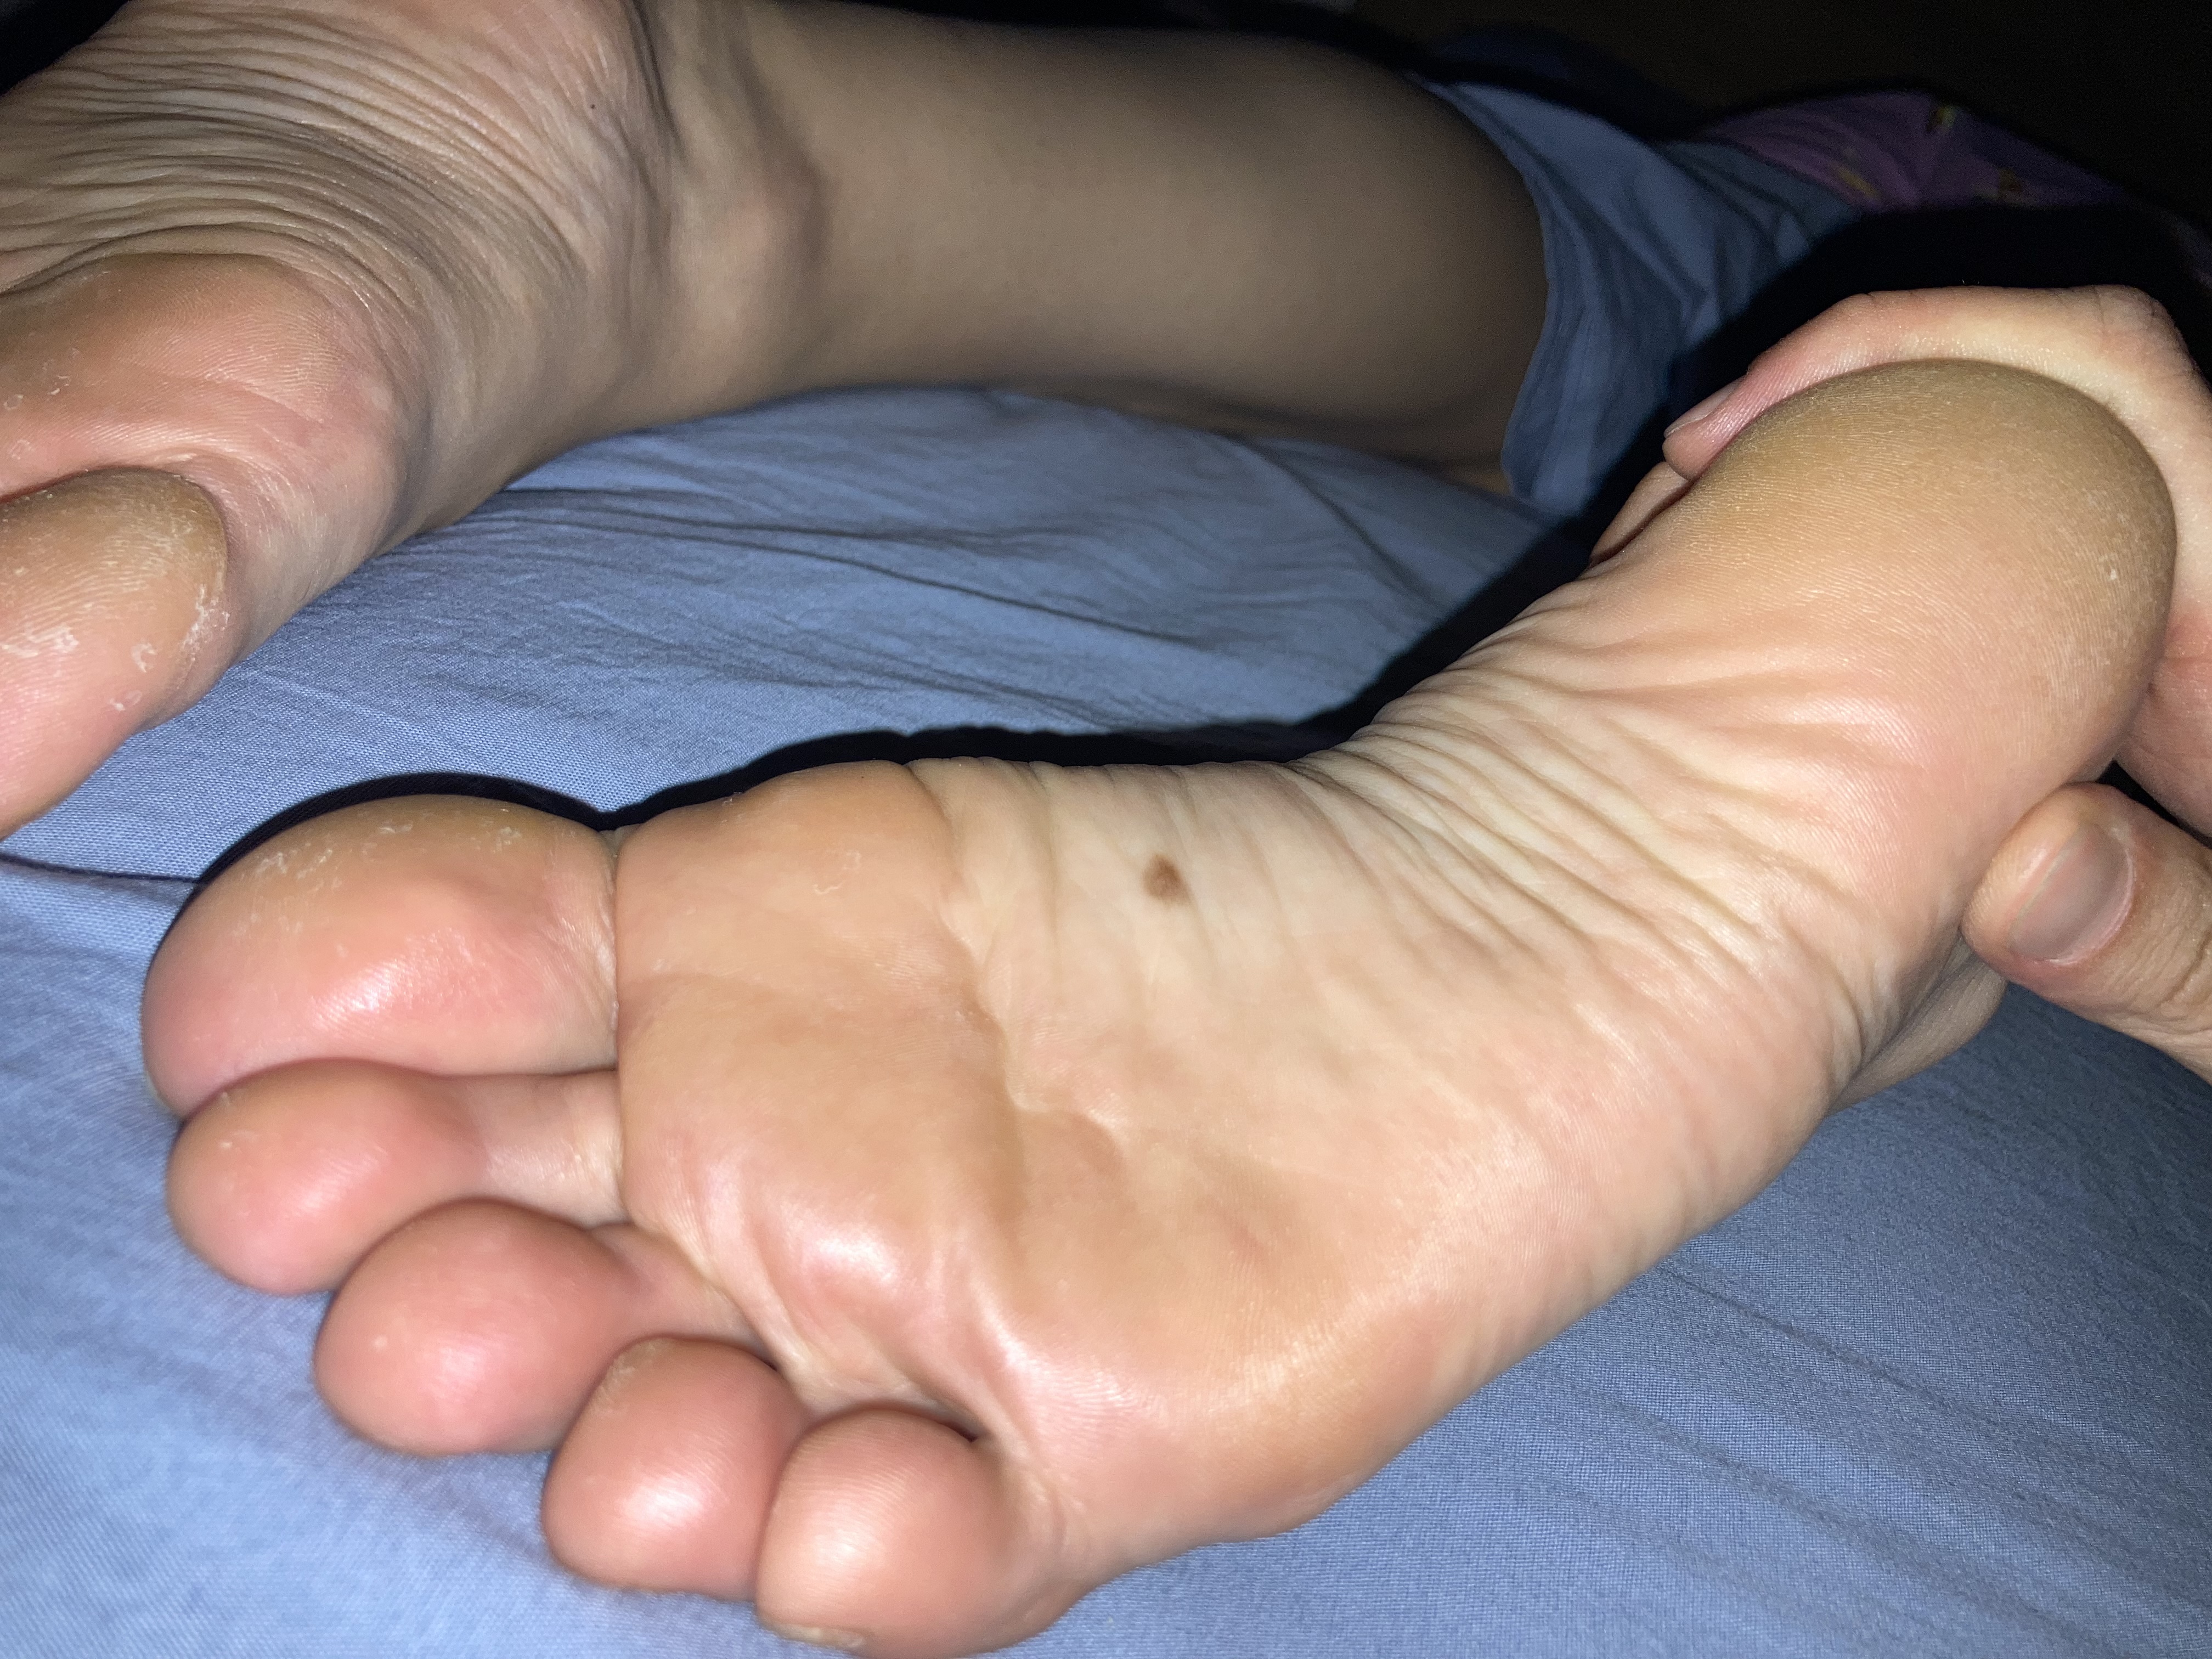 Mature milf Amateur Wife smelly wrinkled feet soles archive